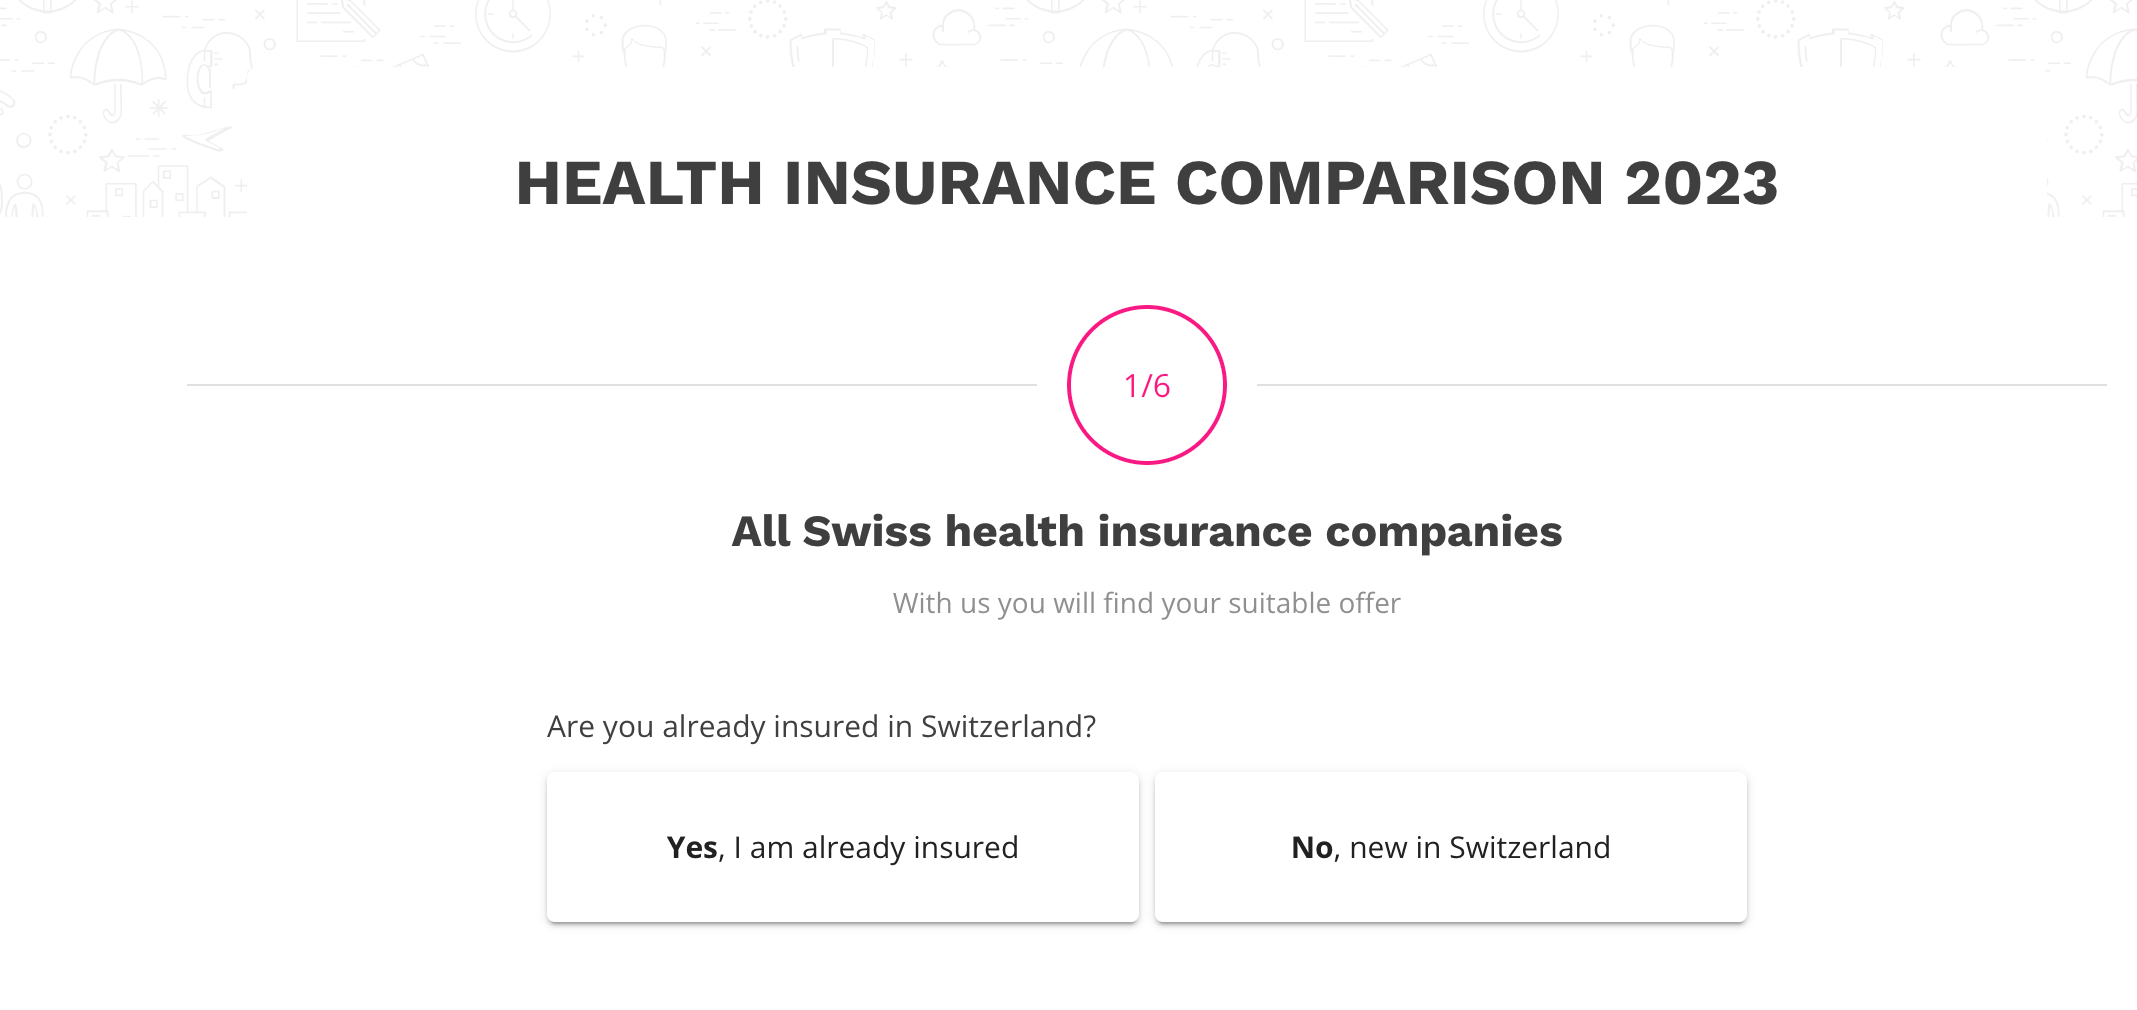 How much does health insurance cost in Switzerland